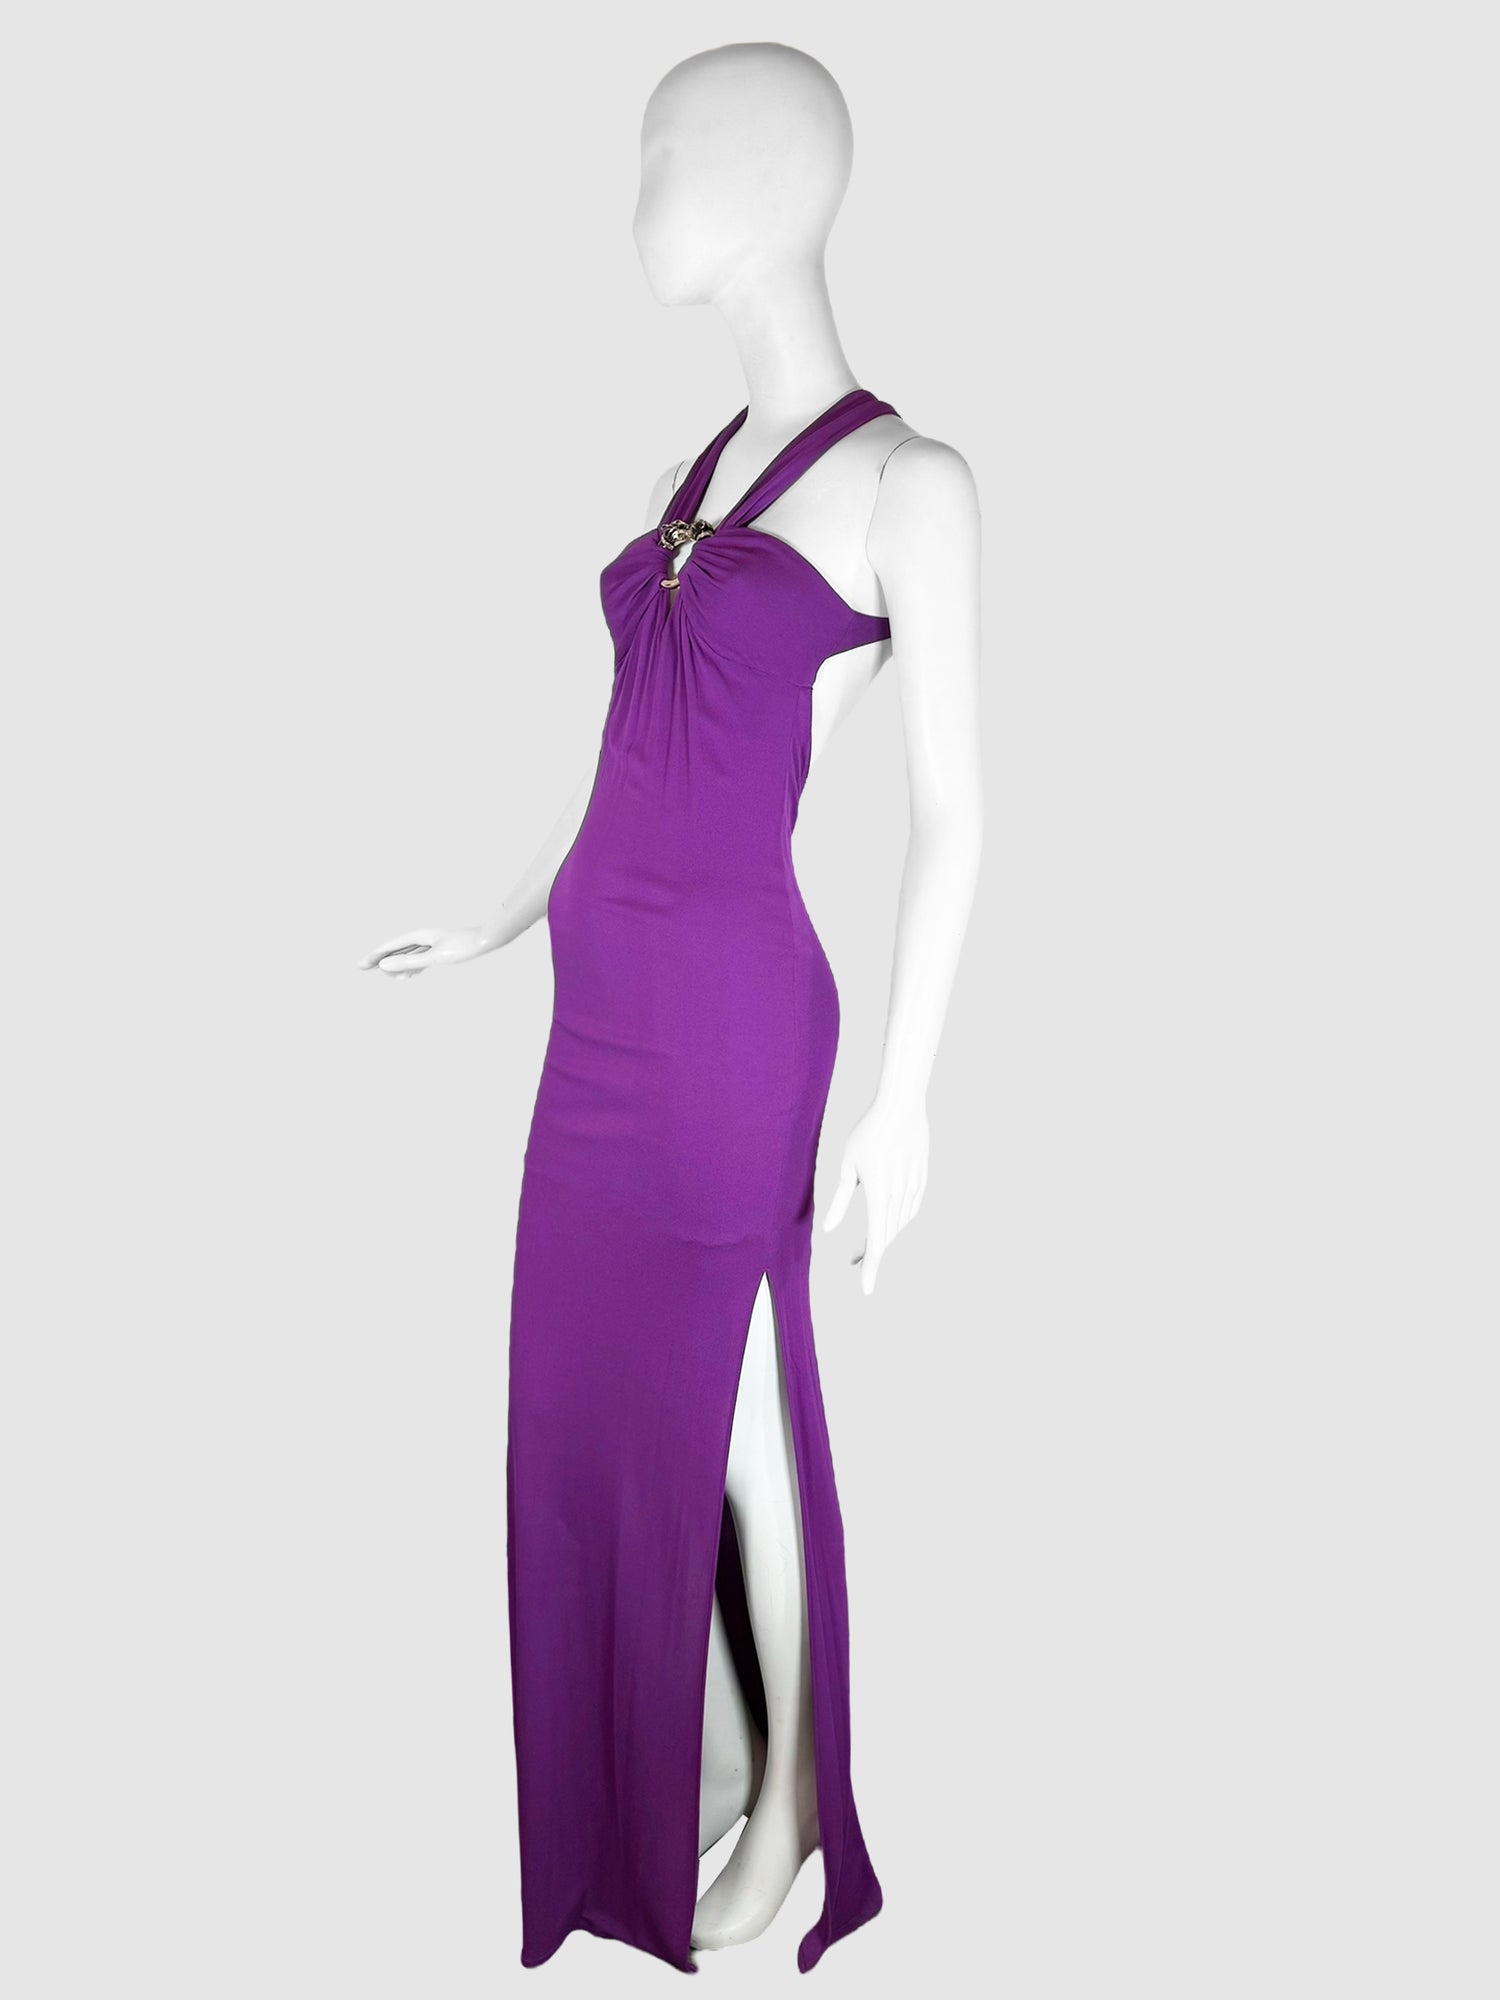 Roberto Cavalli Purple Plunge Neckline Long Dress with Halter Neck, Cutouts and Buckle Accent, Size 40 Vintage Consign Toronto Second Hand